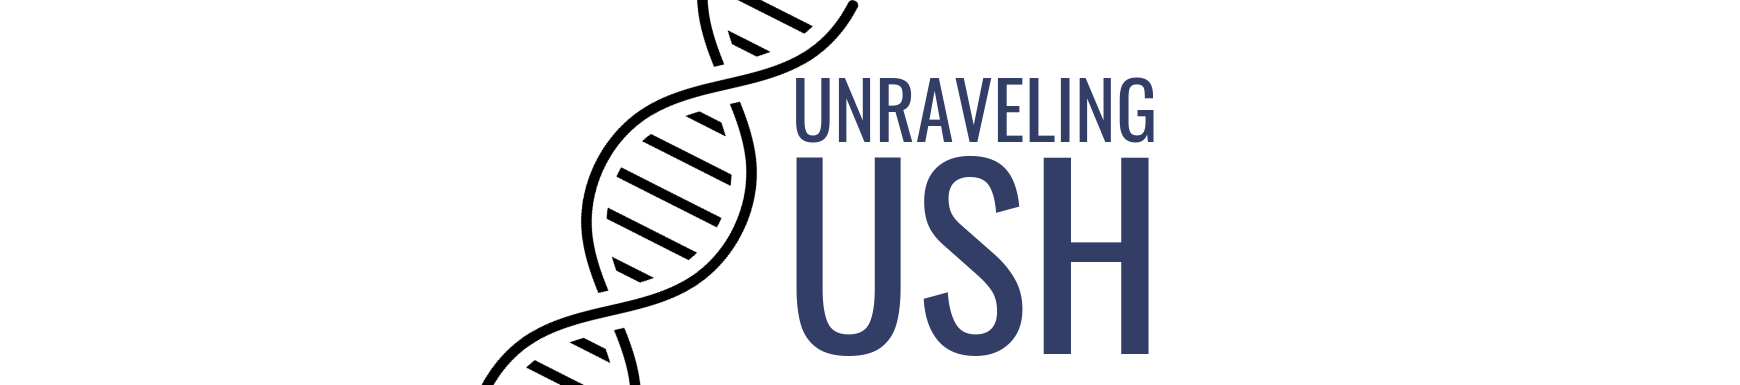 Unraveling USH: Treating Usher syndrome: Current Research